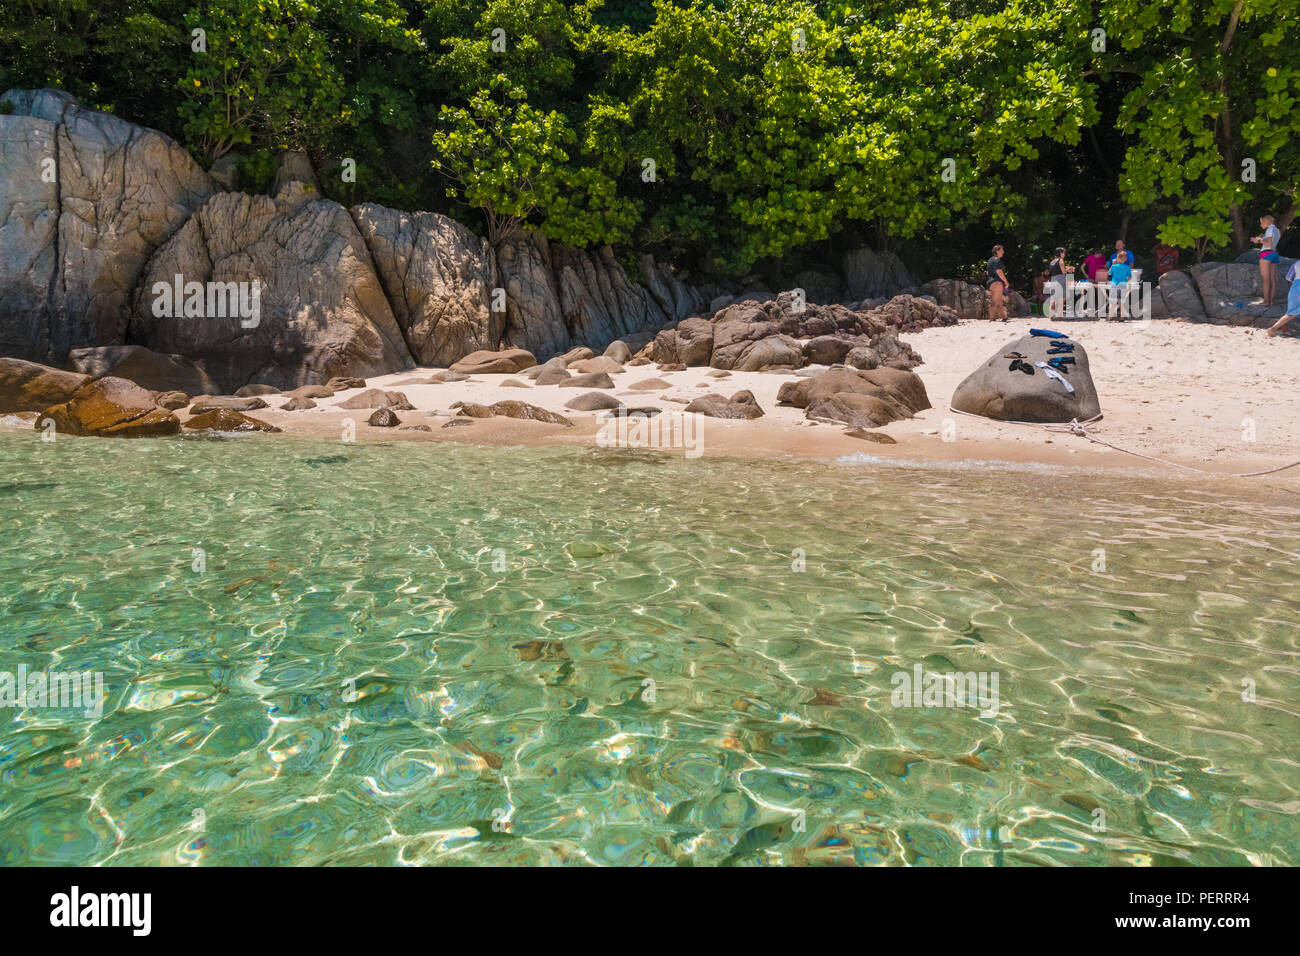 After a snorkelling trip, tourists are eating at the rocky part of Rawa beach under the shade of trees, while the fishes are swimming in the shallow... Stock Photo